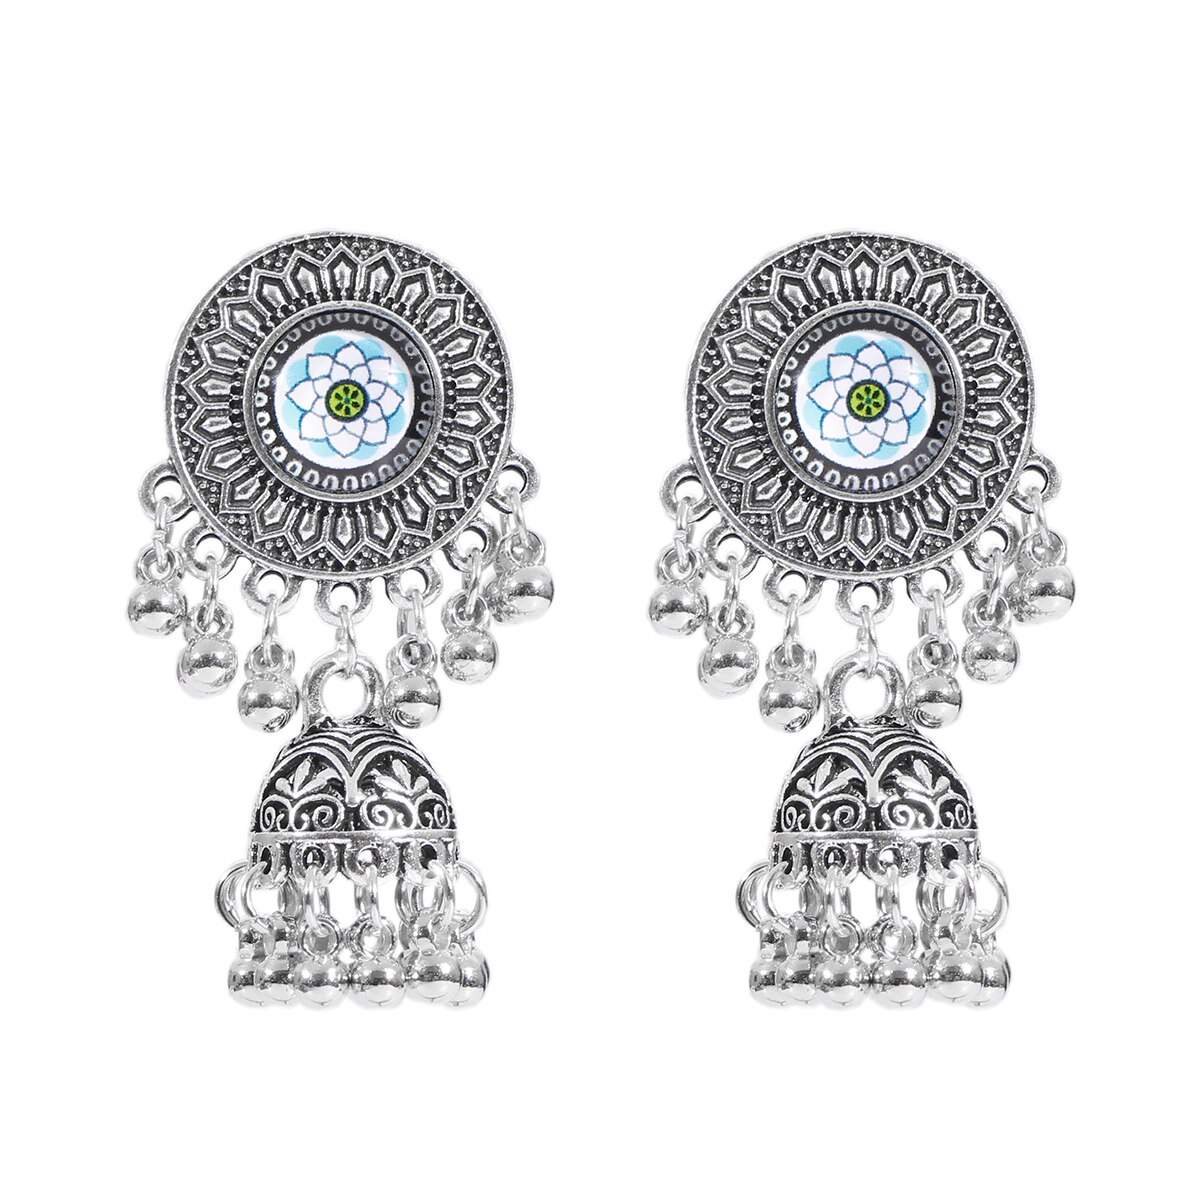 Classic-Vintage-Silver-Color-Alloy-Carved-Bollywood-Oxidized-Earrings-For-Women-Ethnic-Rose-Red-Jhum-1005003651700580-8